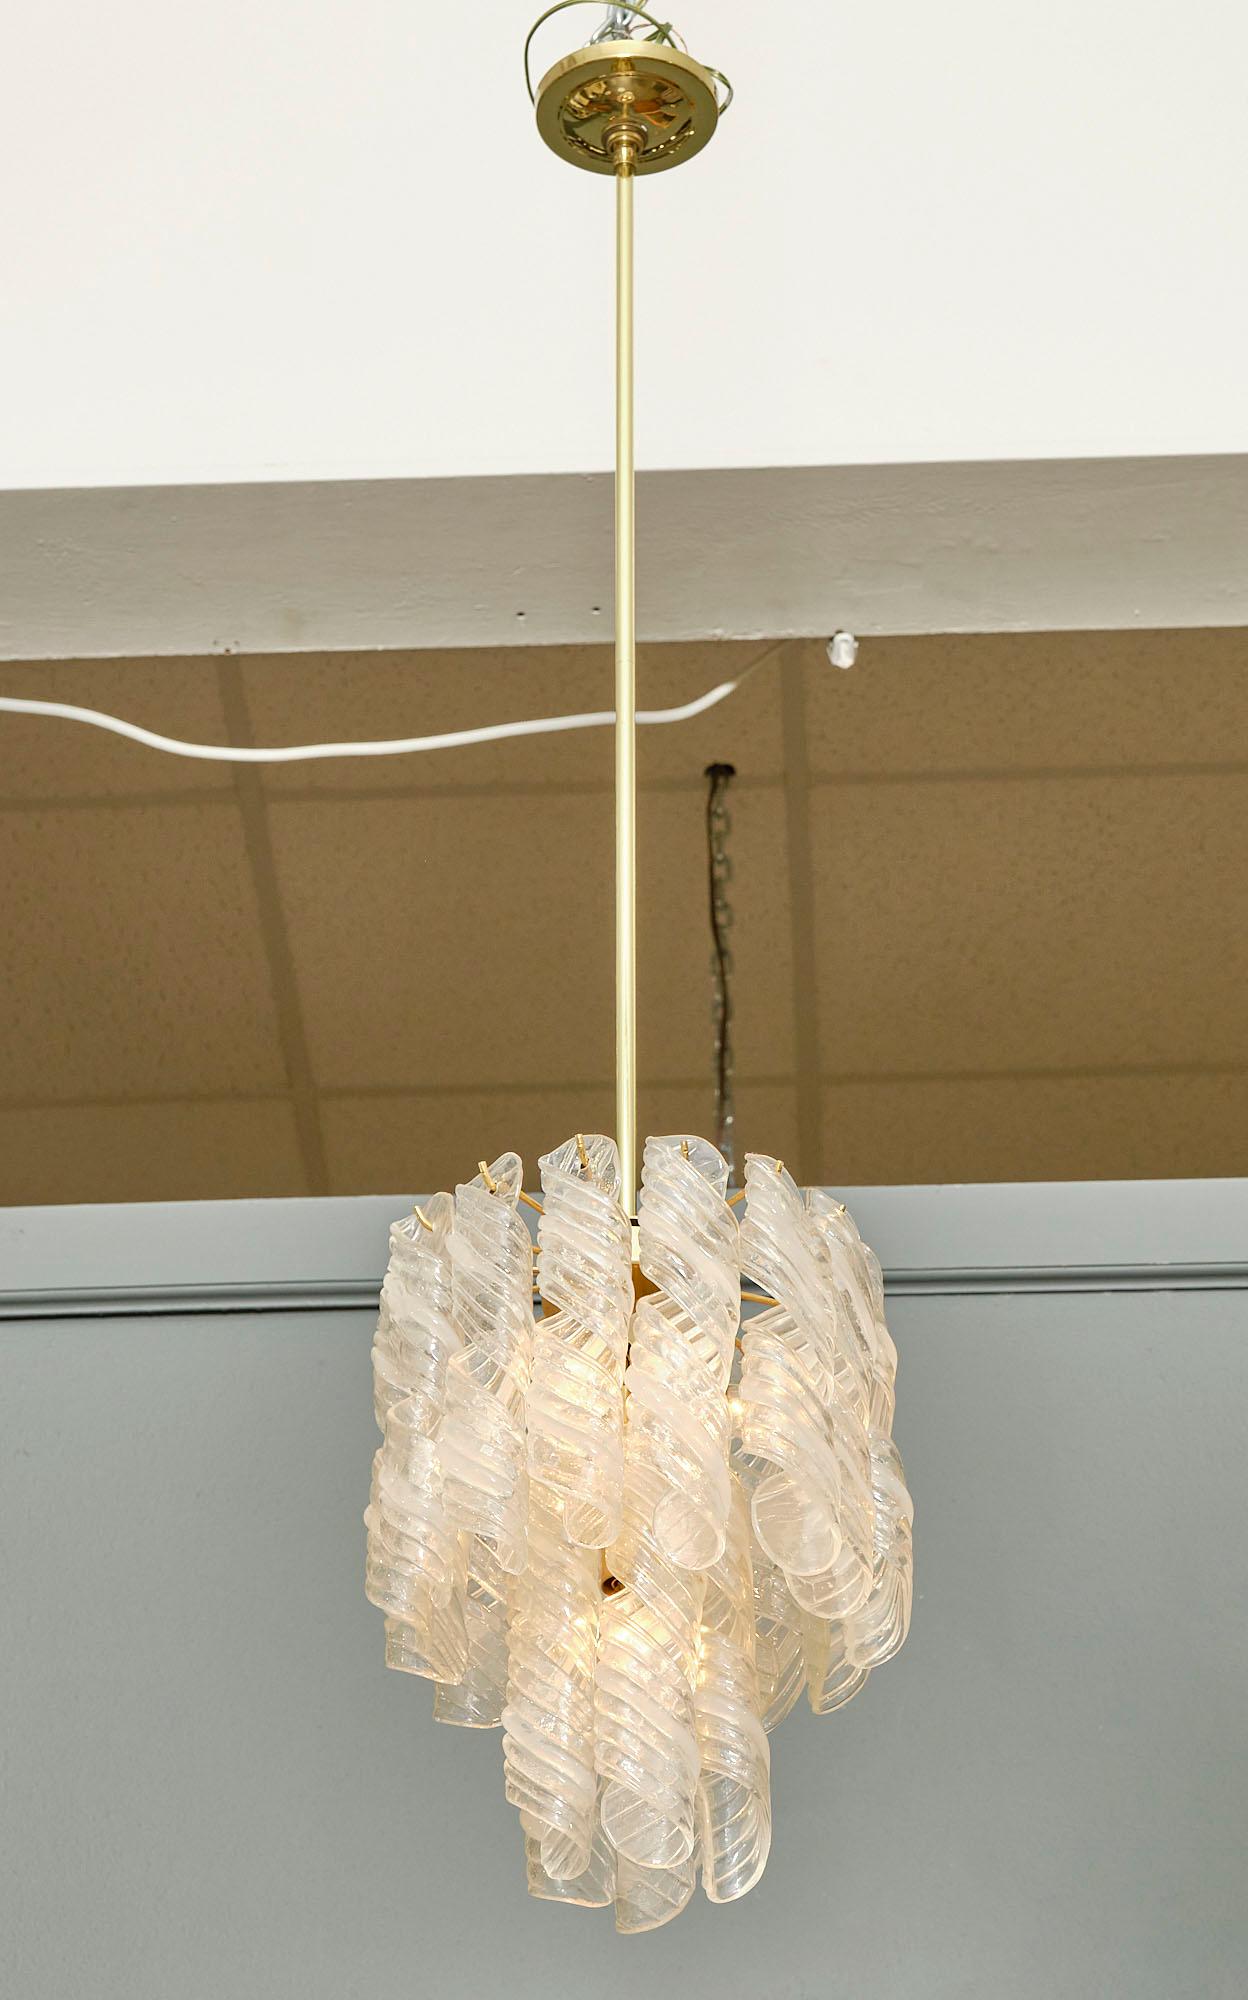 Chandelier from the island of Murano featuring an array of “torcilioni” clear glass hanging from a two level brass structure.
The current height from ceiling is 51